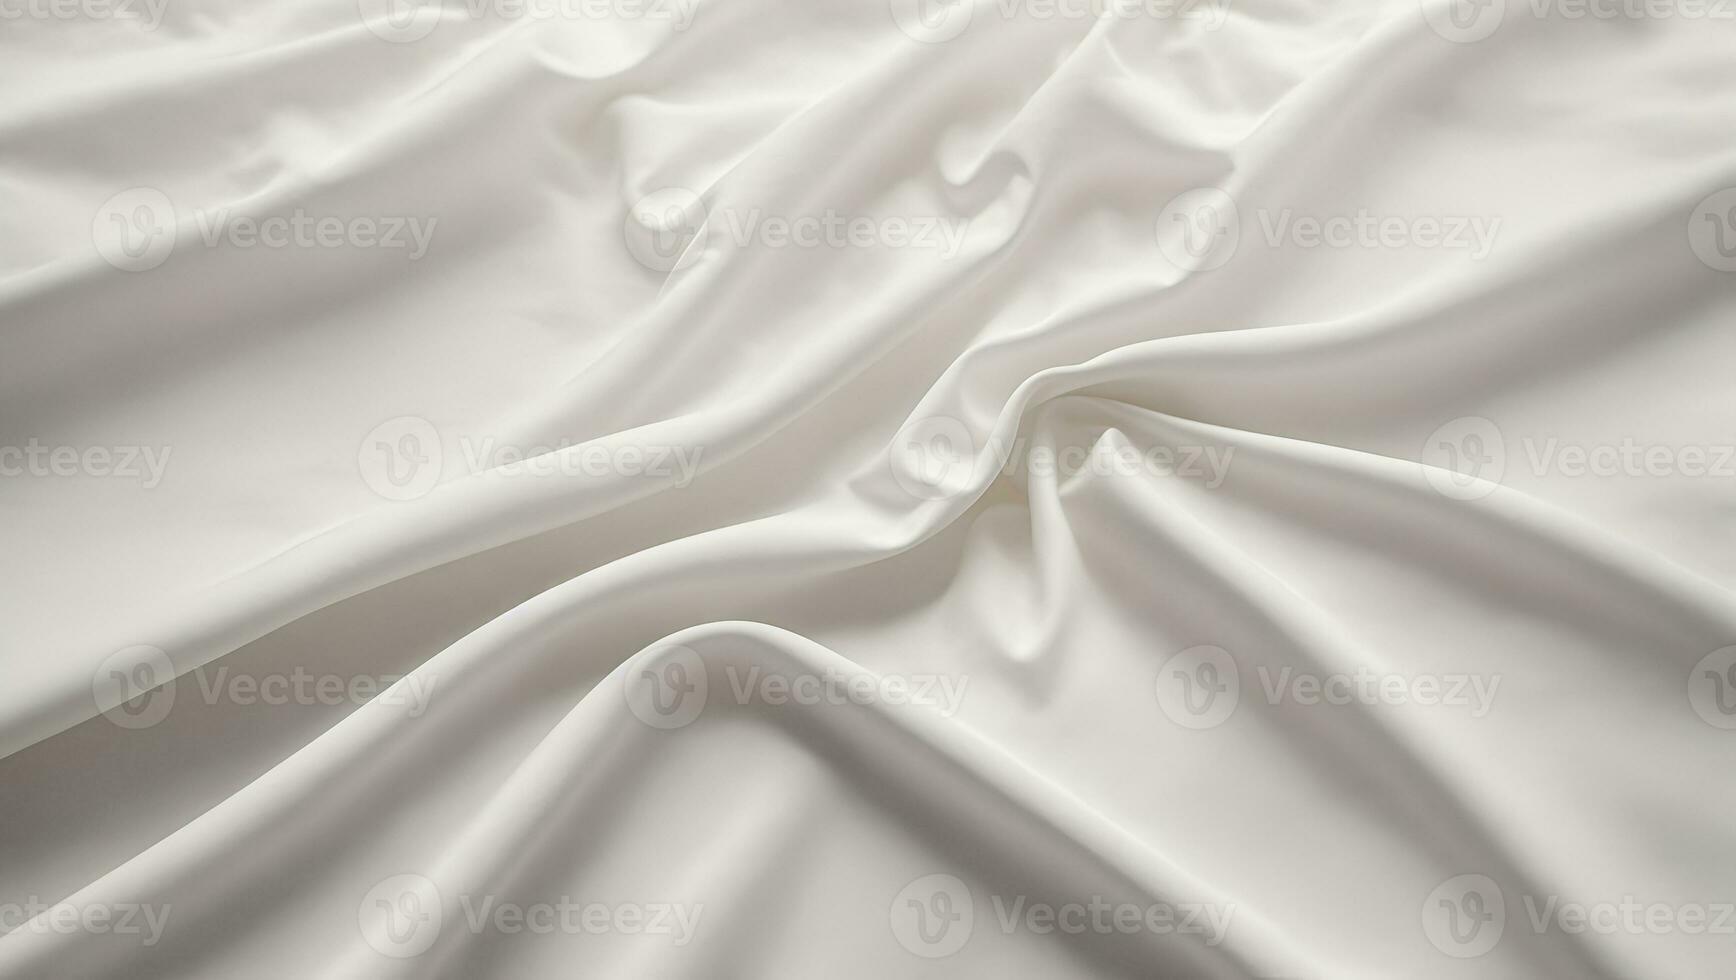 smooth elegant white fabric or satin texture as abstract background luxurious background design 04 photo